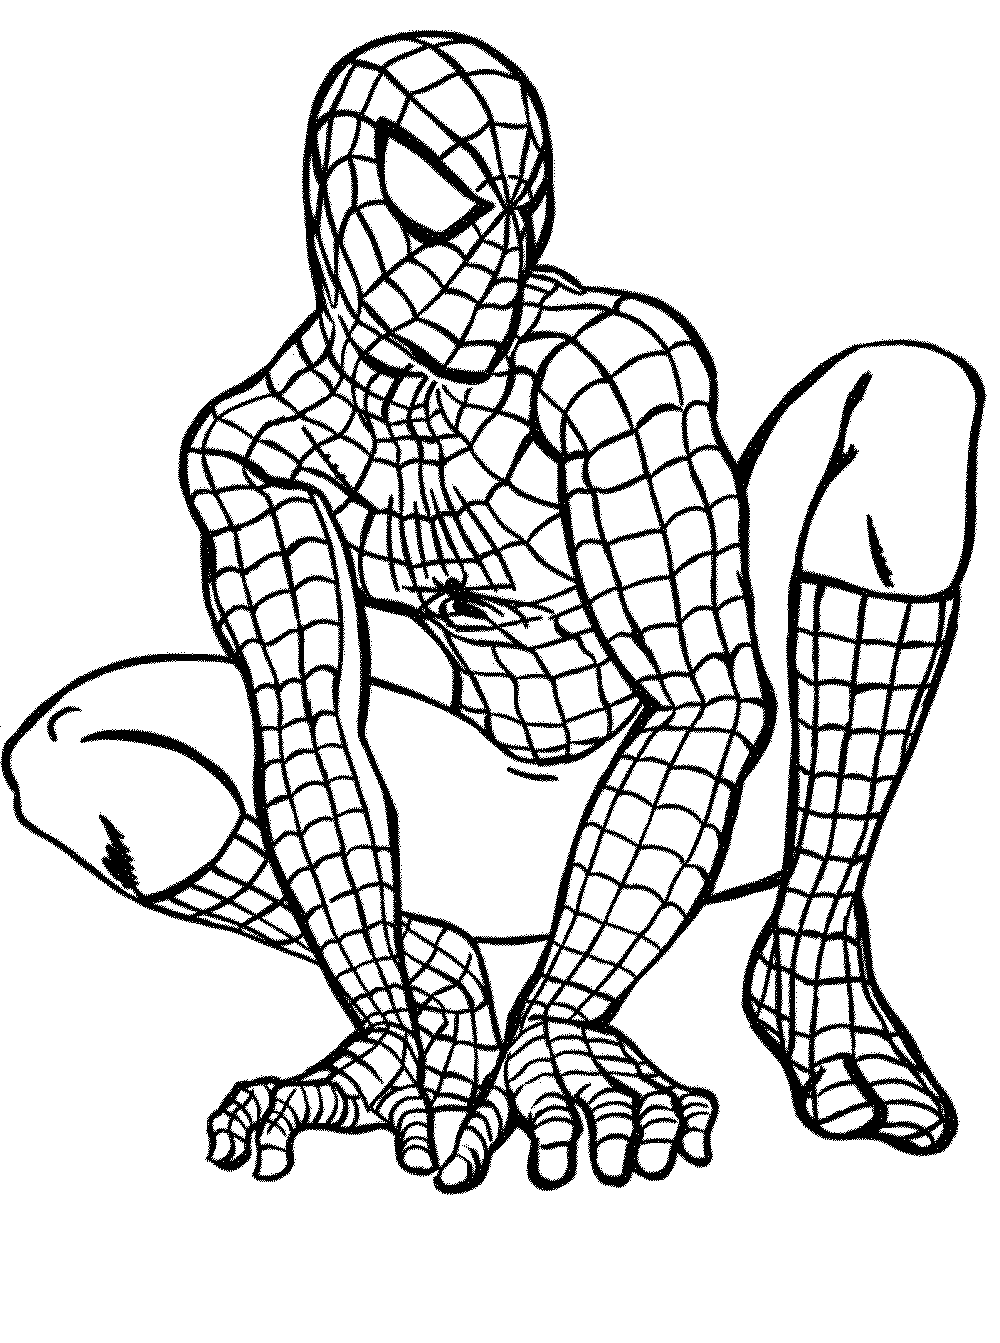 Superhero printable colouring pages